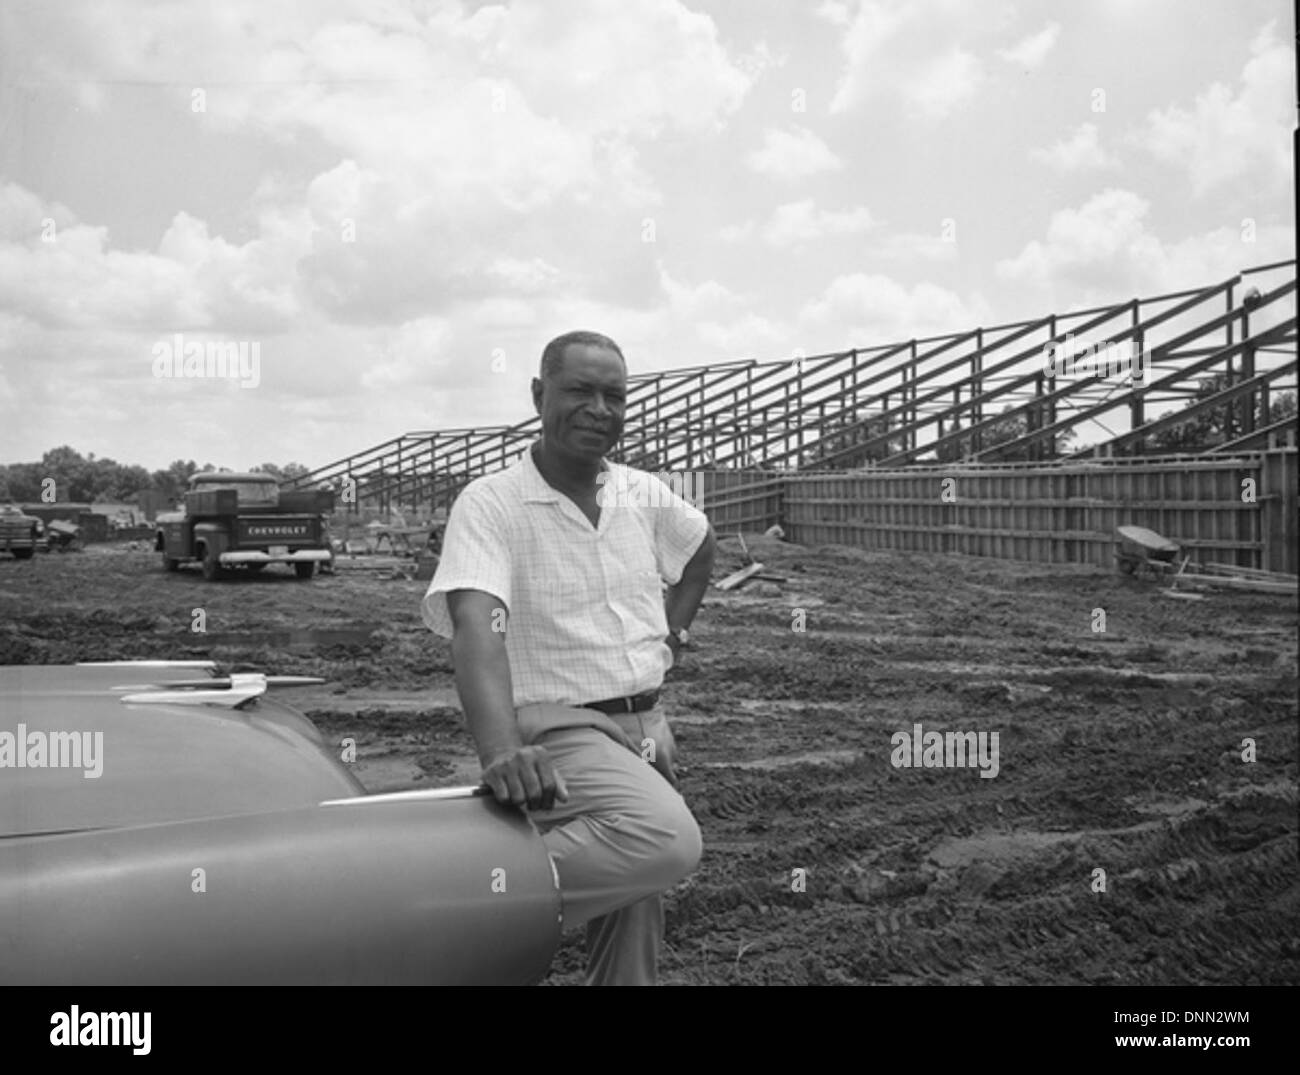 Jake Gaither at the new FAMU footbal stadium under construction in Tallahassee, Florida Stock Photo